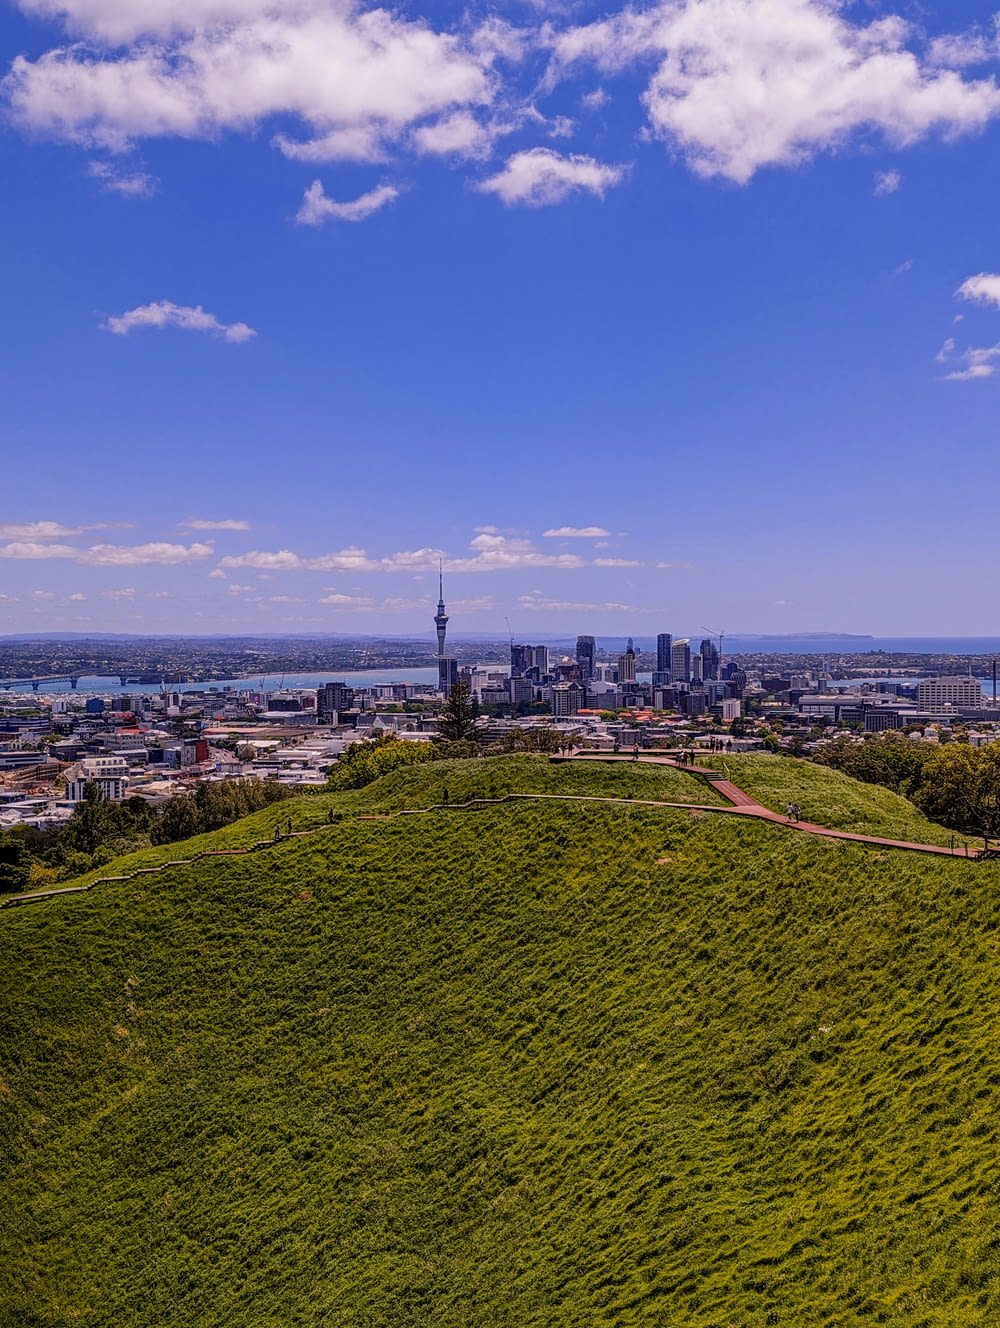 a grassy hill with a city in the background